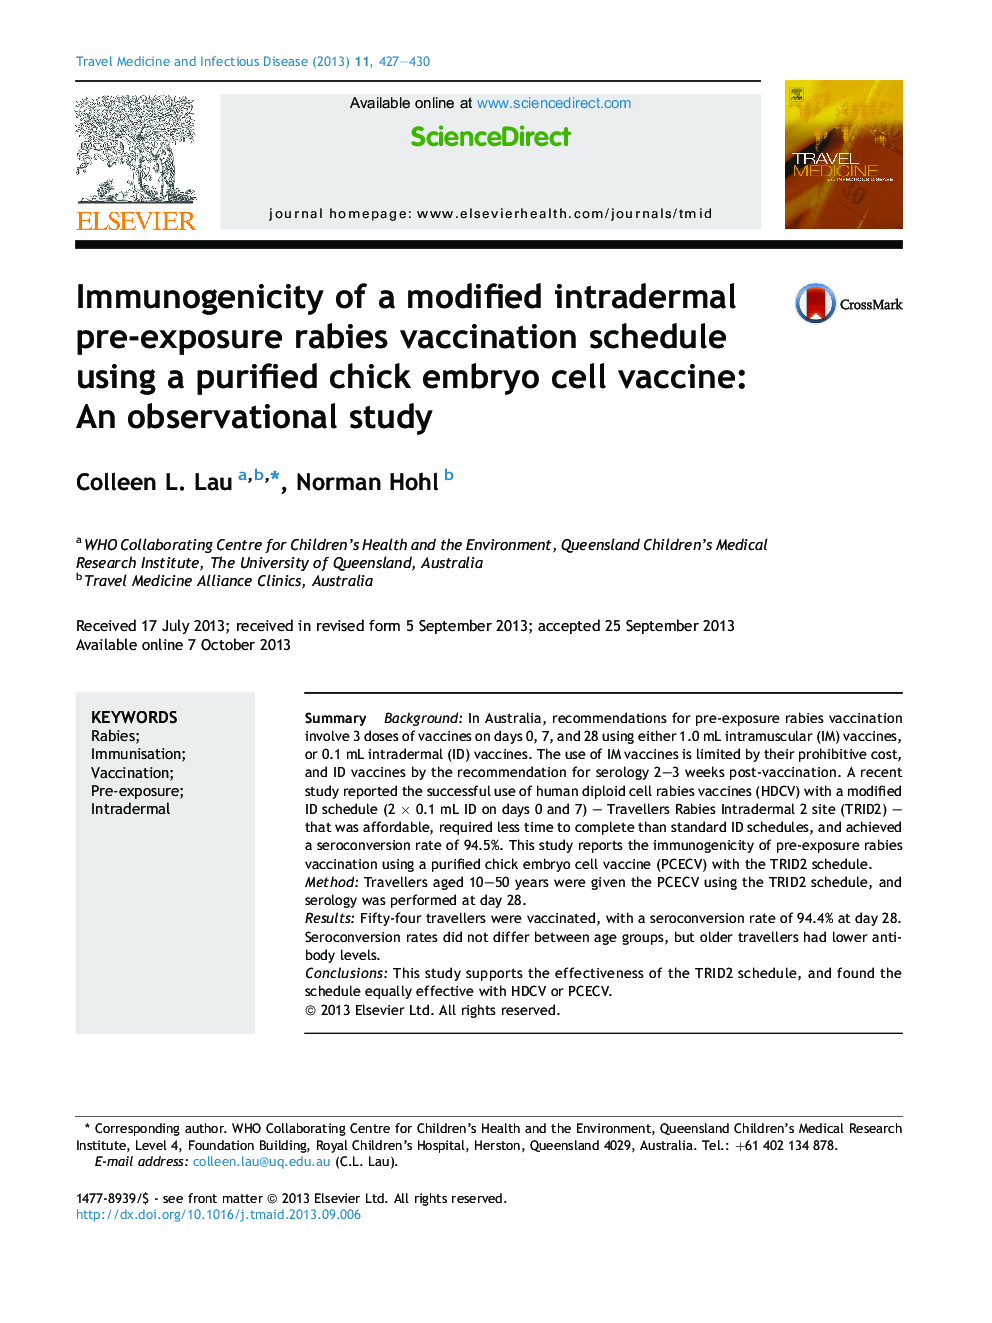 Immunogenicity of a modified intradermal pre-exposure rabies vaccination schedule using a purified chick embryo cell vaccine: An observational study